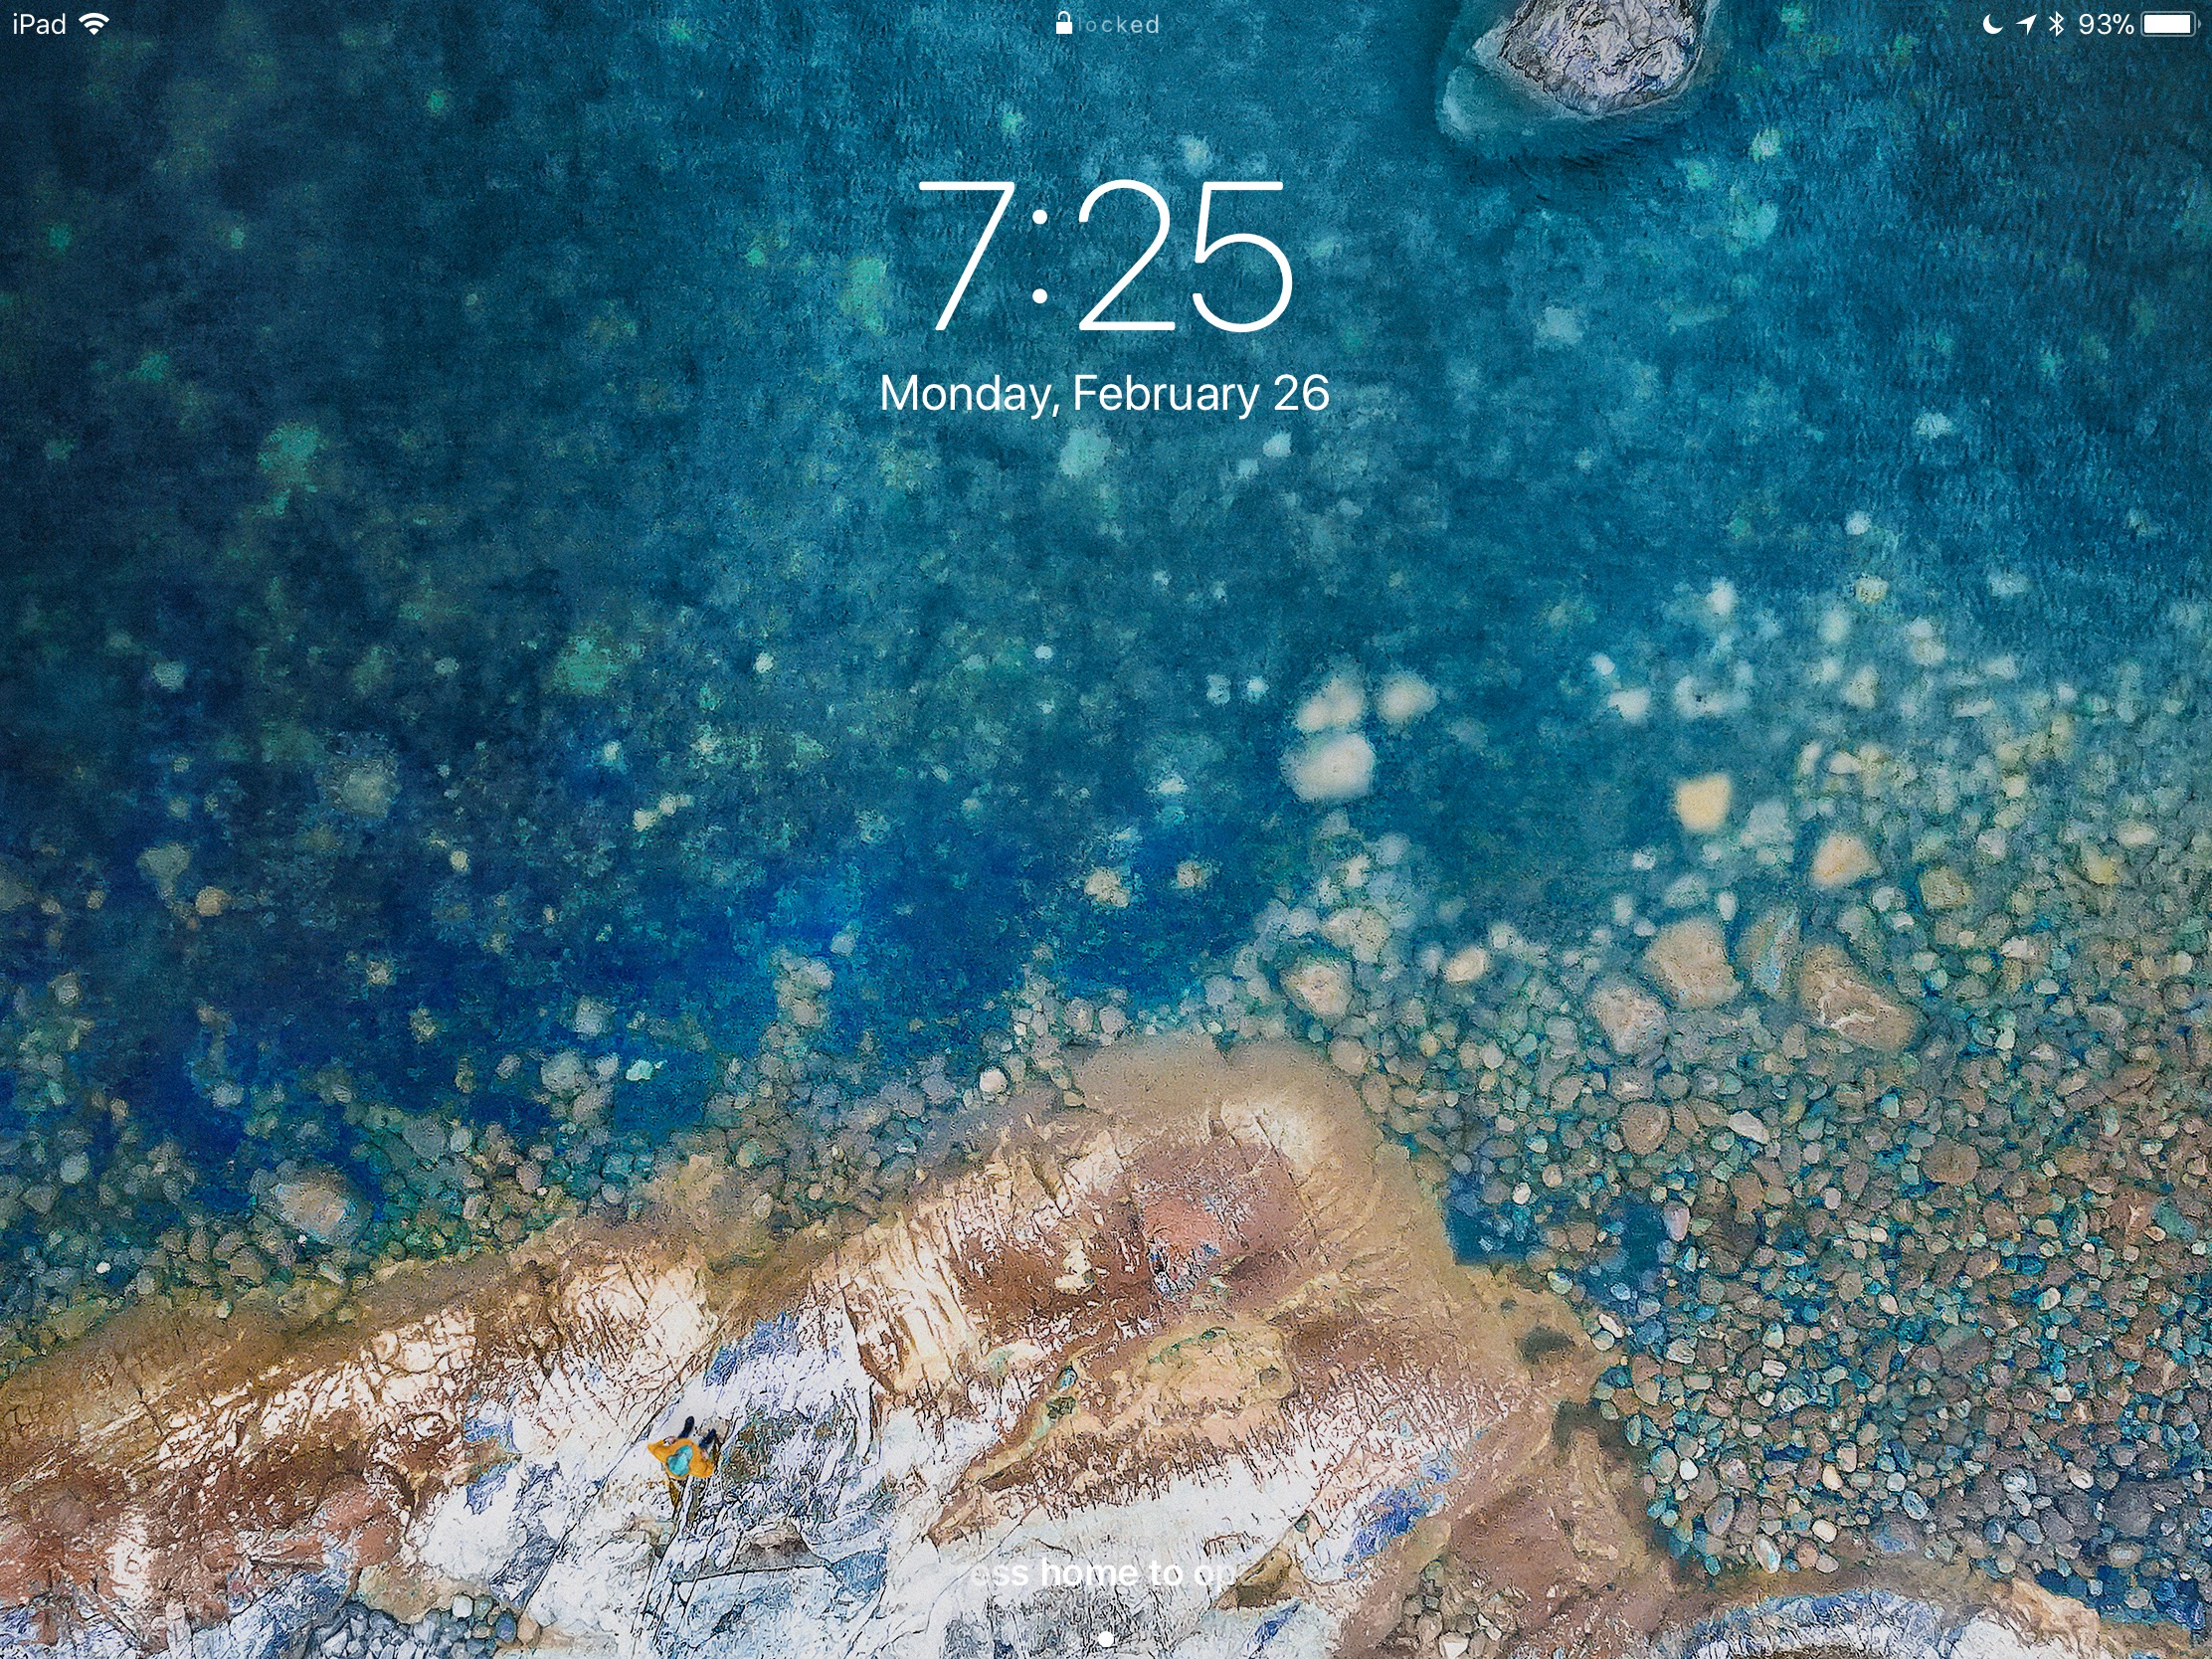 How To Change Your iPad Wallpaper